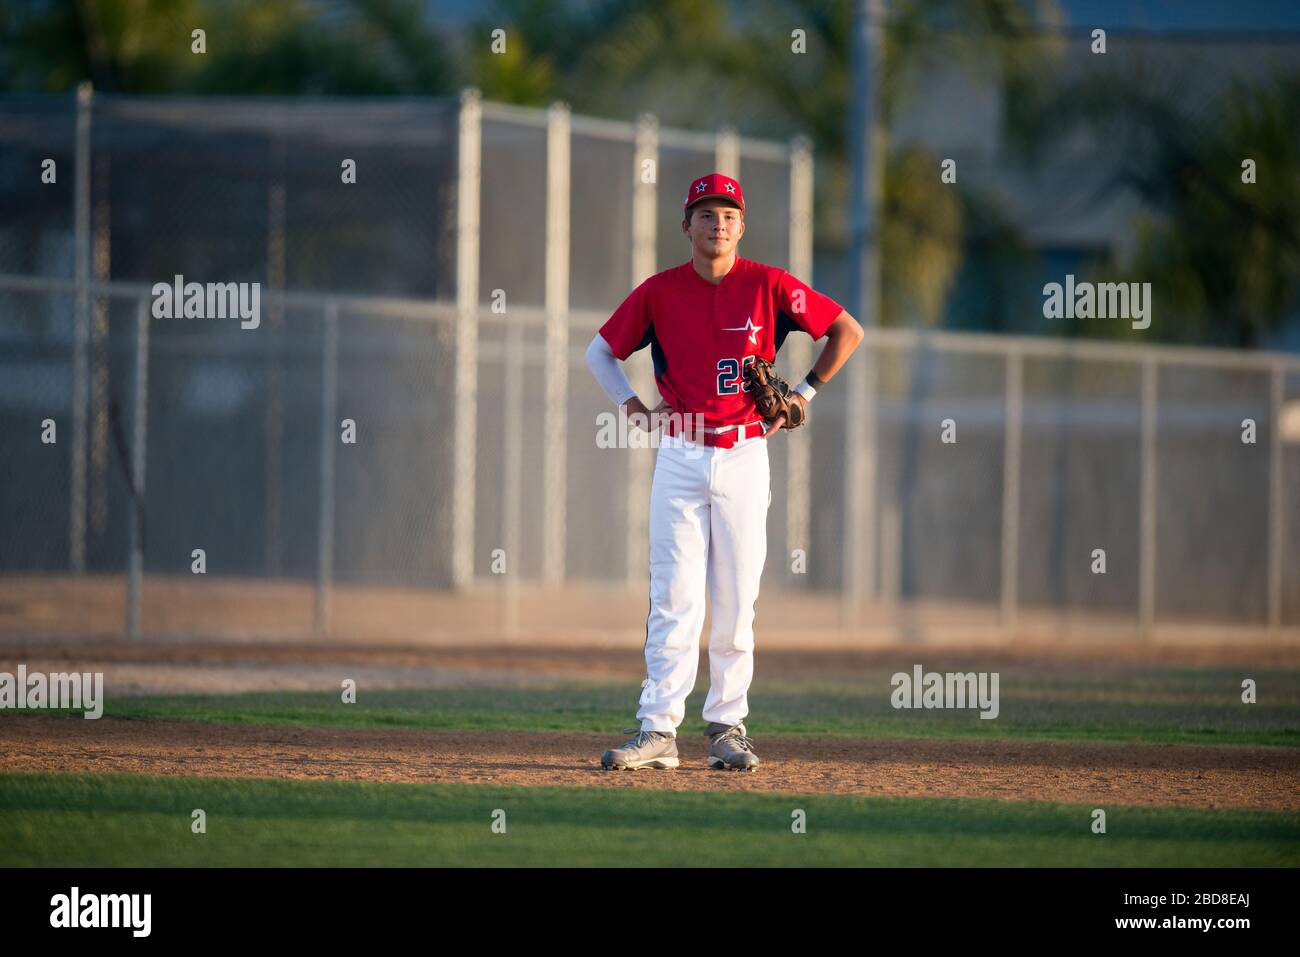 Teen baseball player in red uniform standing in the infield Stock Photo